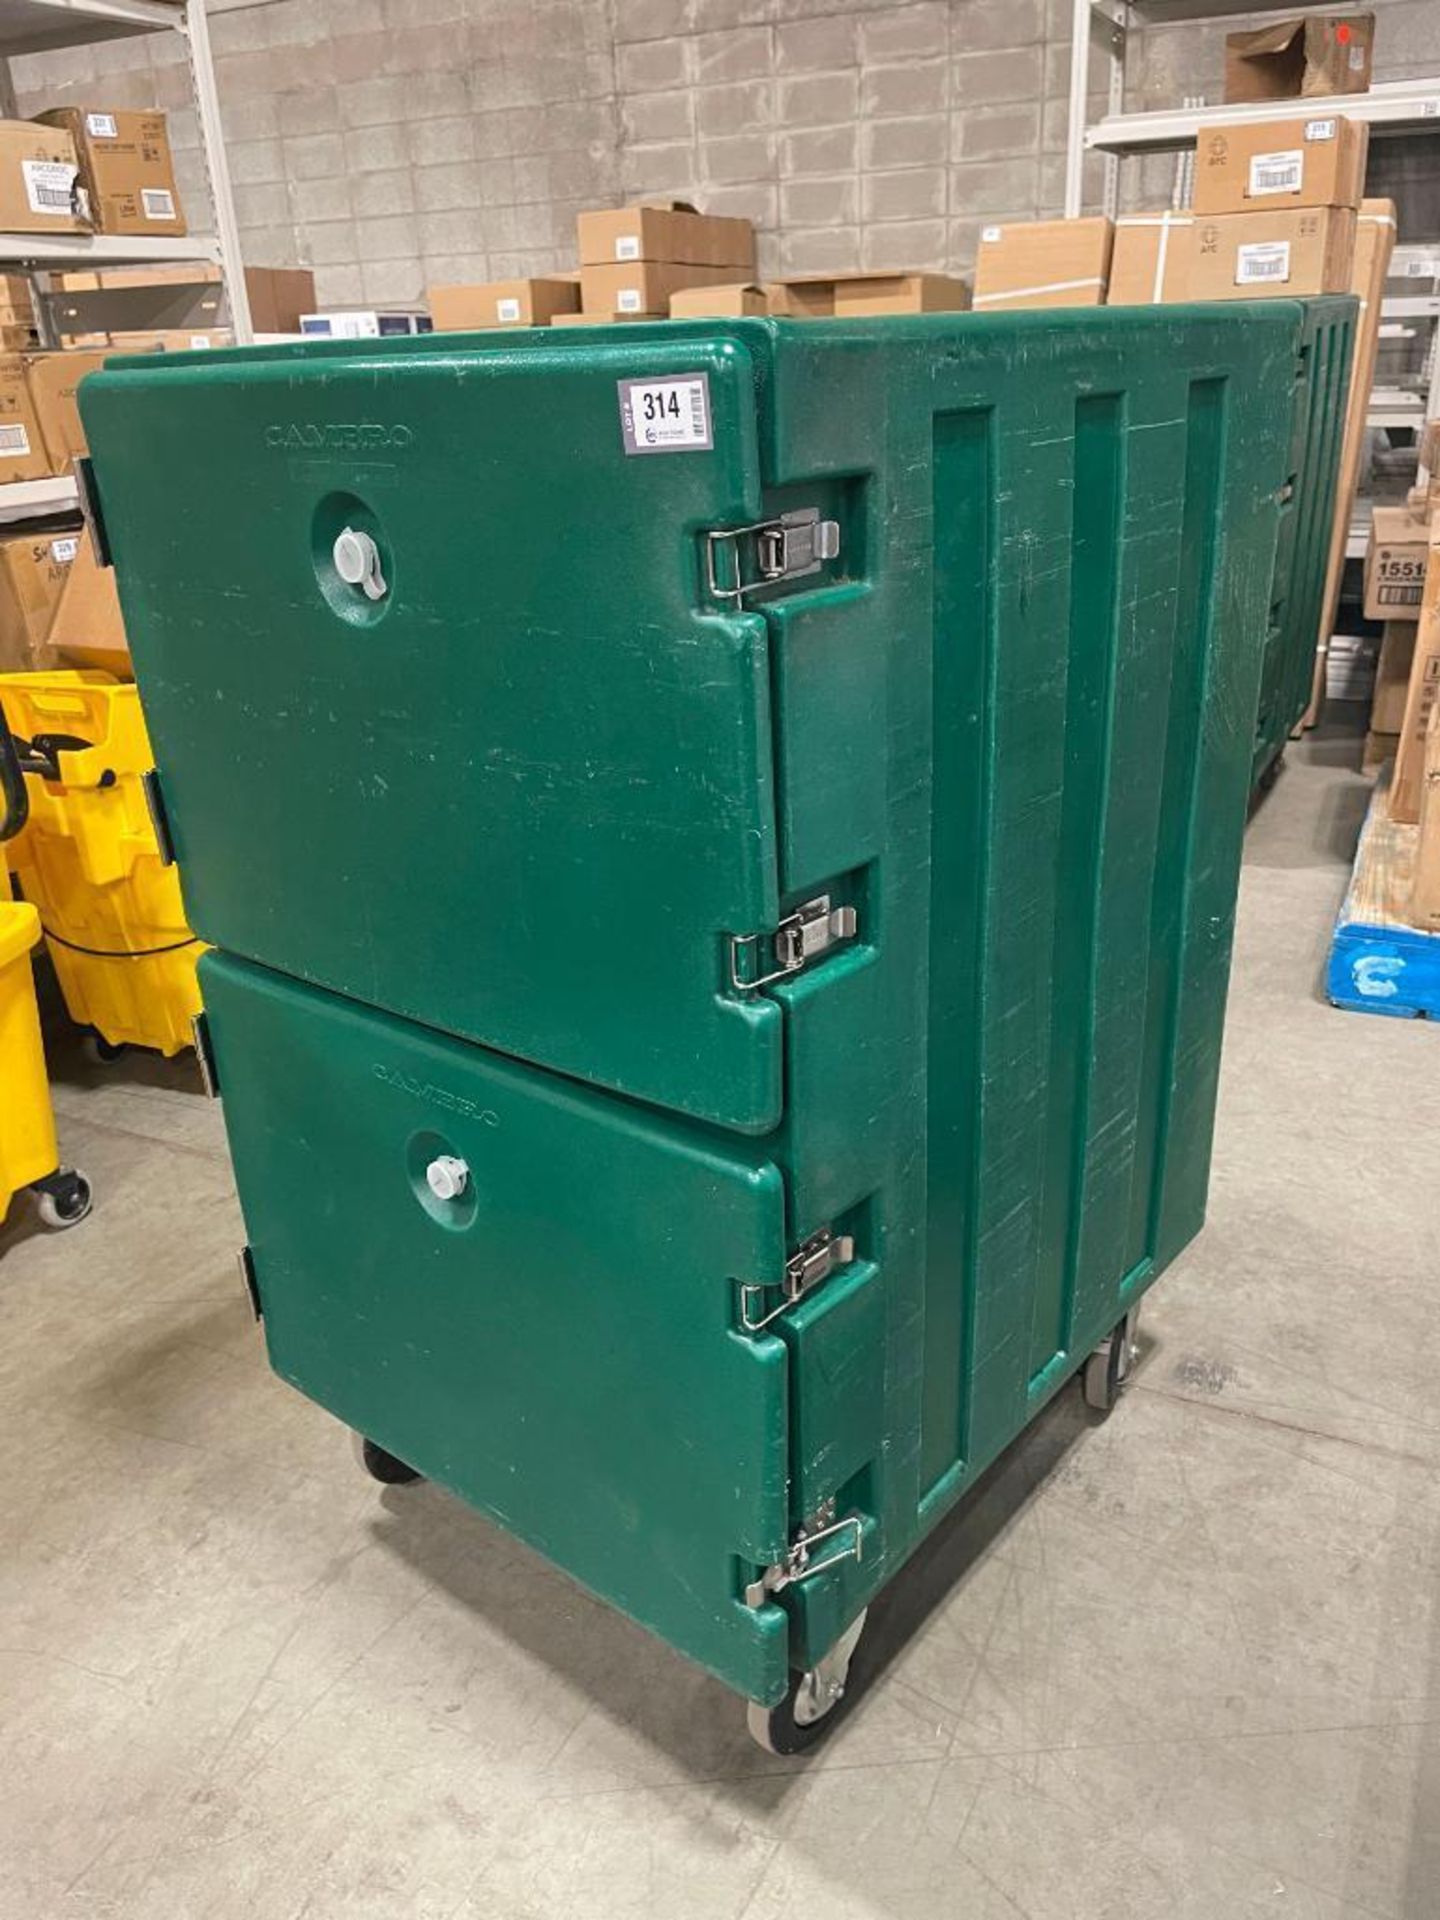 CAMBRO 1200MPC DOUBLE COMPARTMENT INSULATED FOOD STORAGE CABINET ON WHEELS - Image 6 of 8